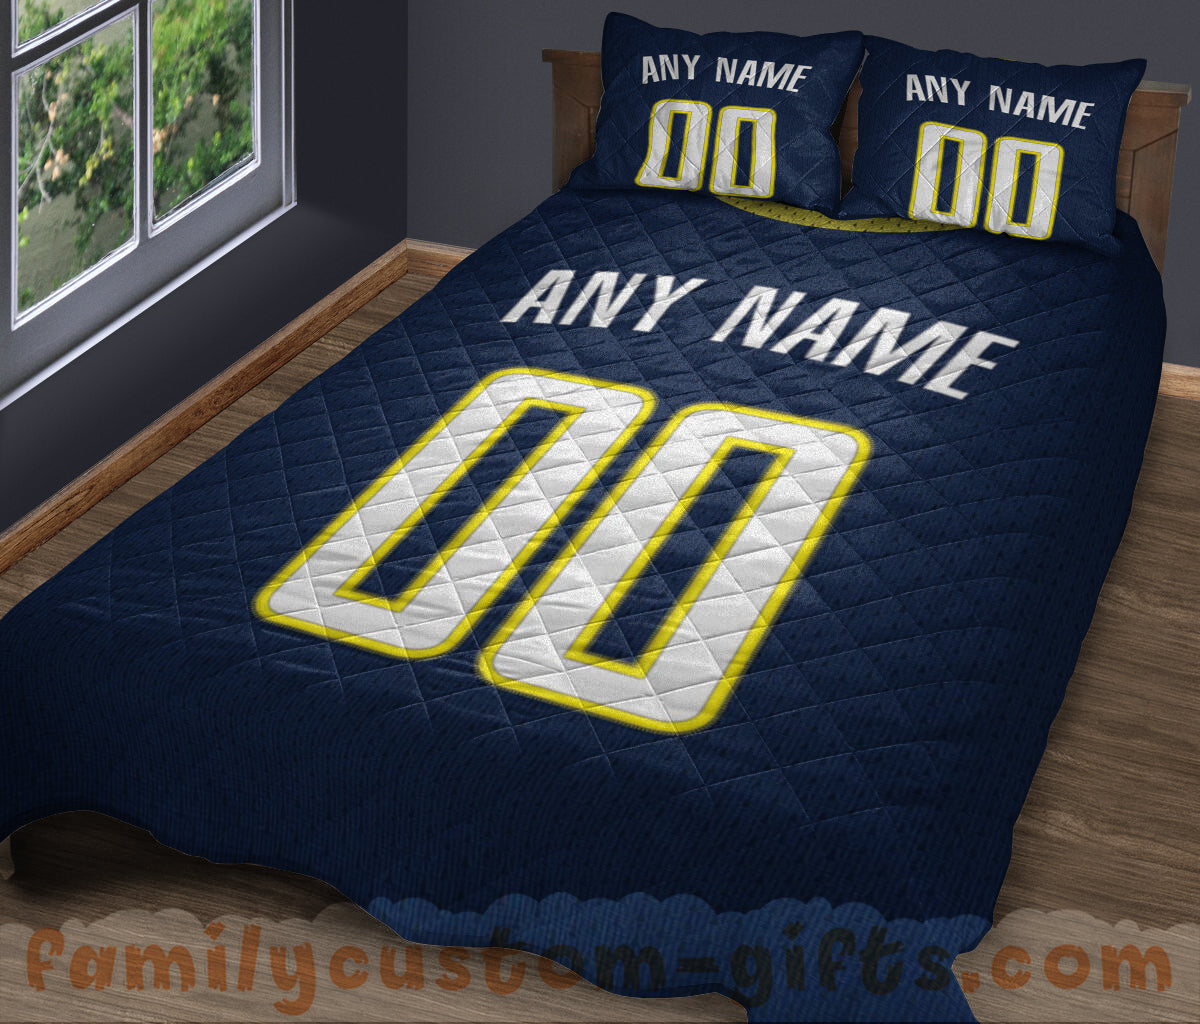 Custom Quilt Sets Indiana Jersey Personalized Basketball Premium Quilt Bedding for Men Women